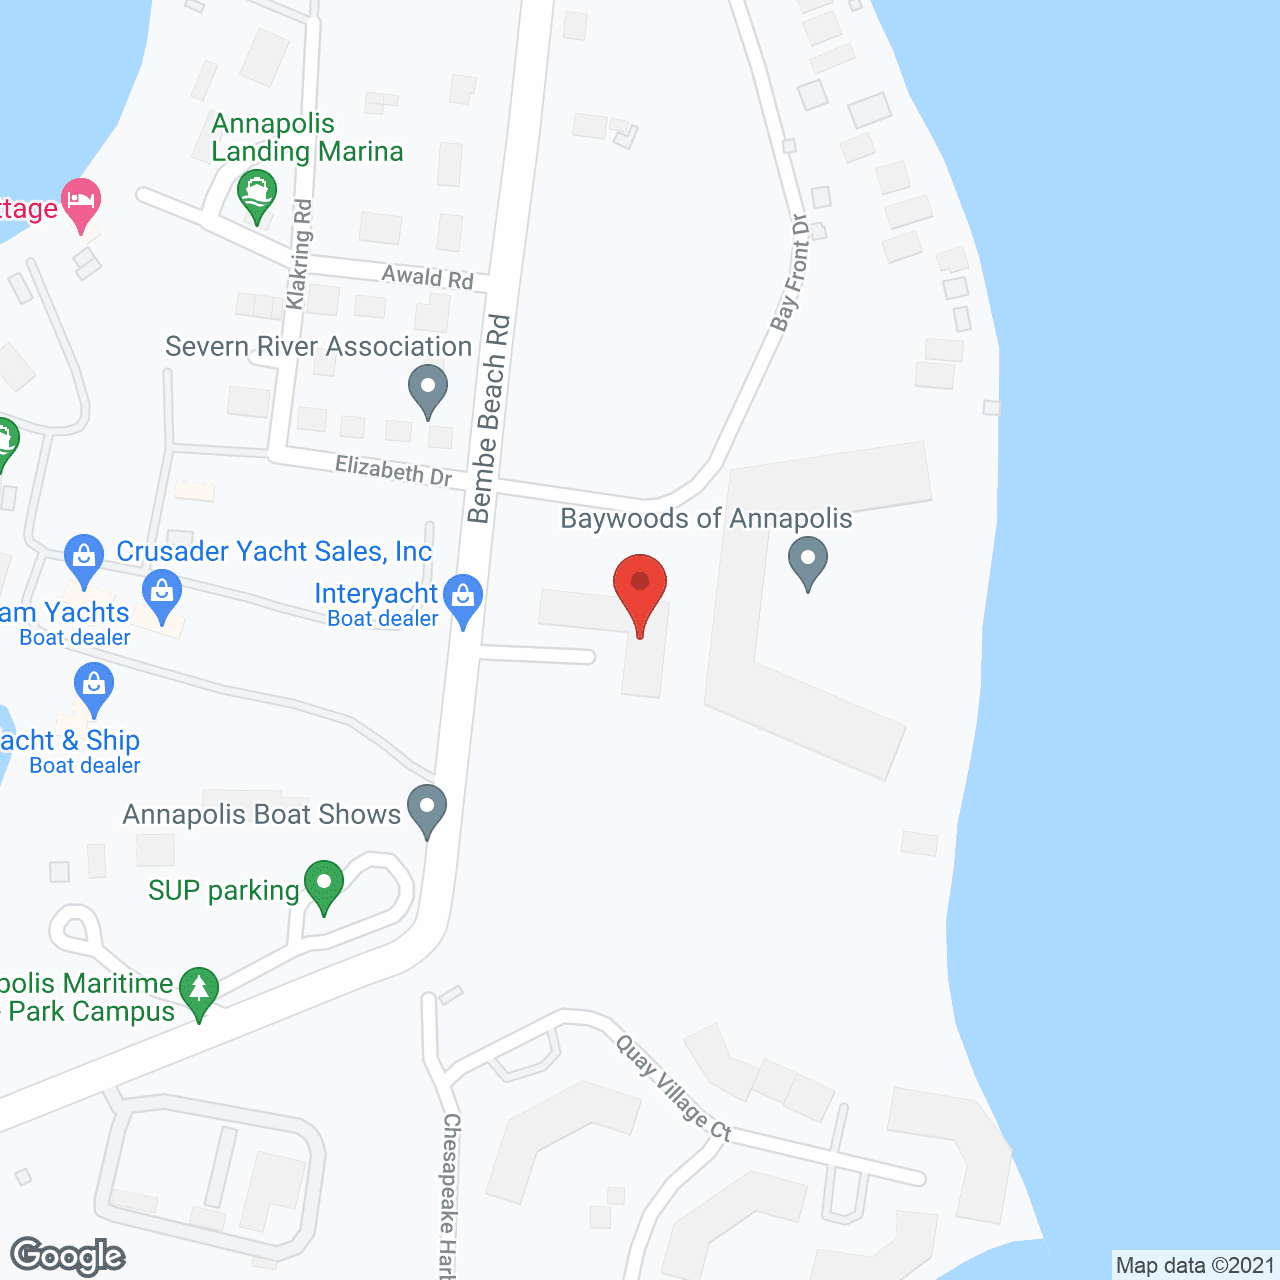 BayWoods of Annapolis in google map